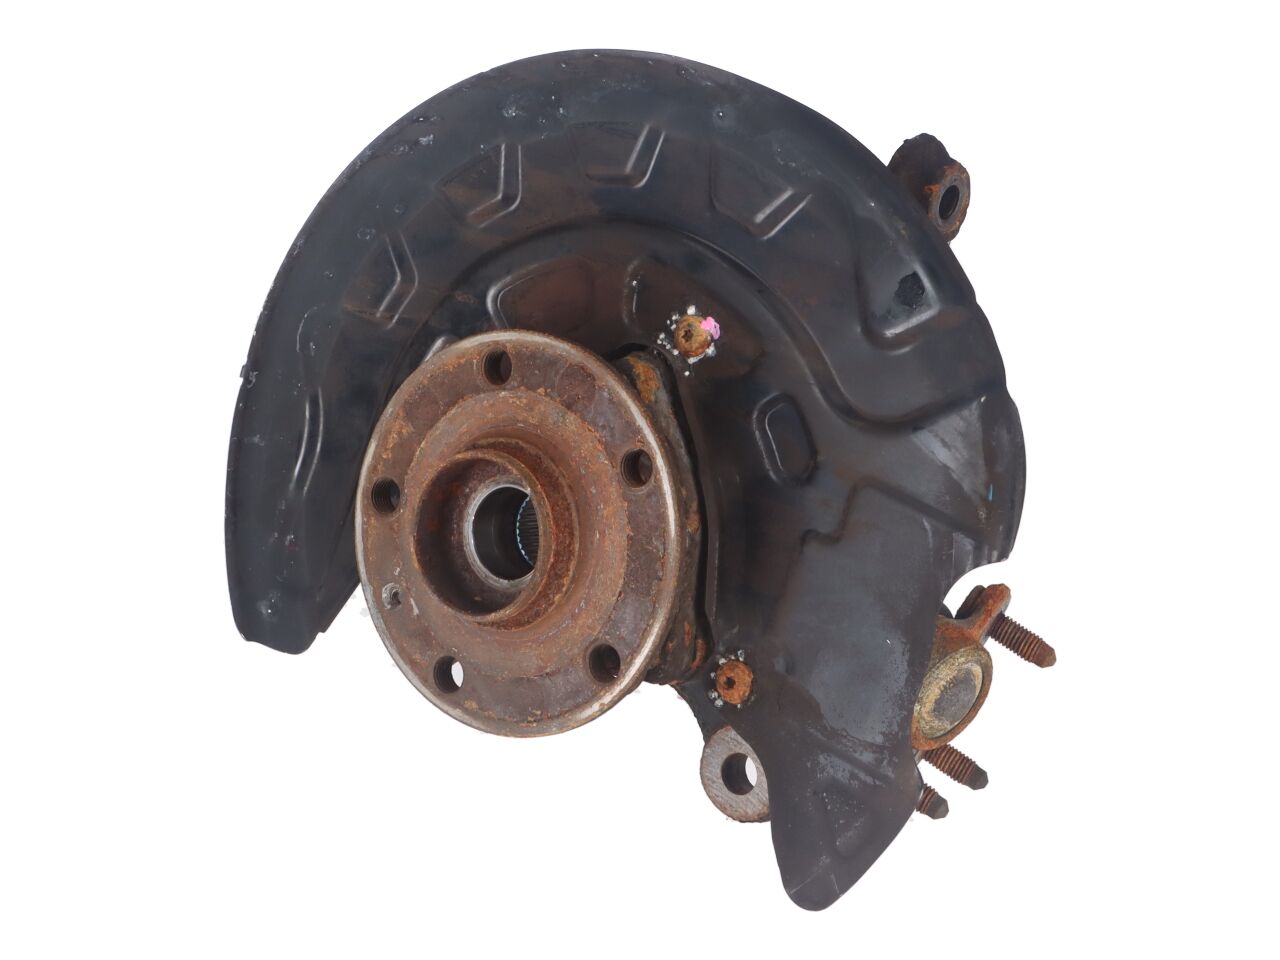 Fusee links voor AUDI A3 (8V) 1.4 TFSI  90 kW  122 PS (04.2012-> )